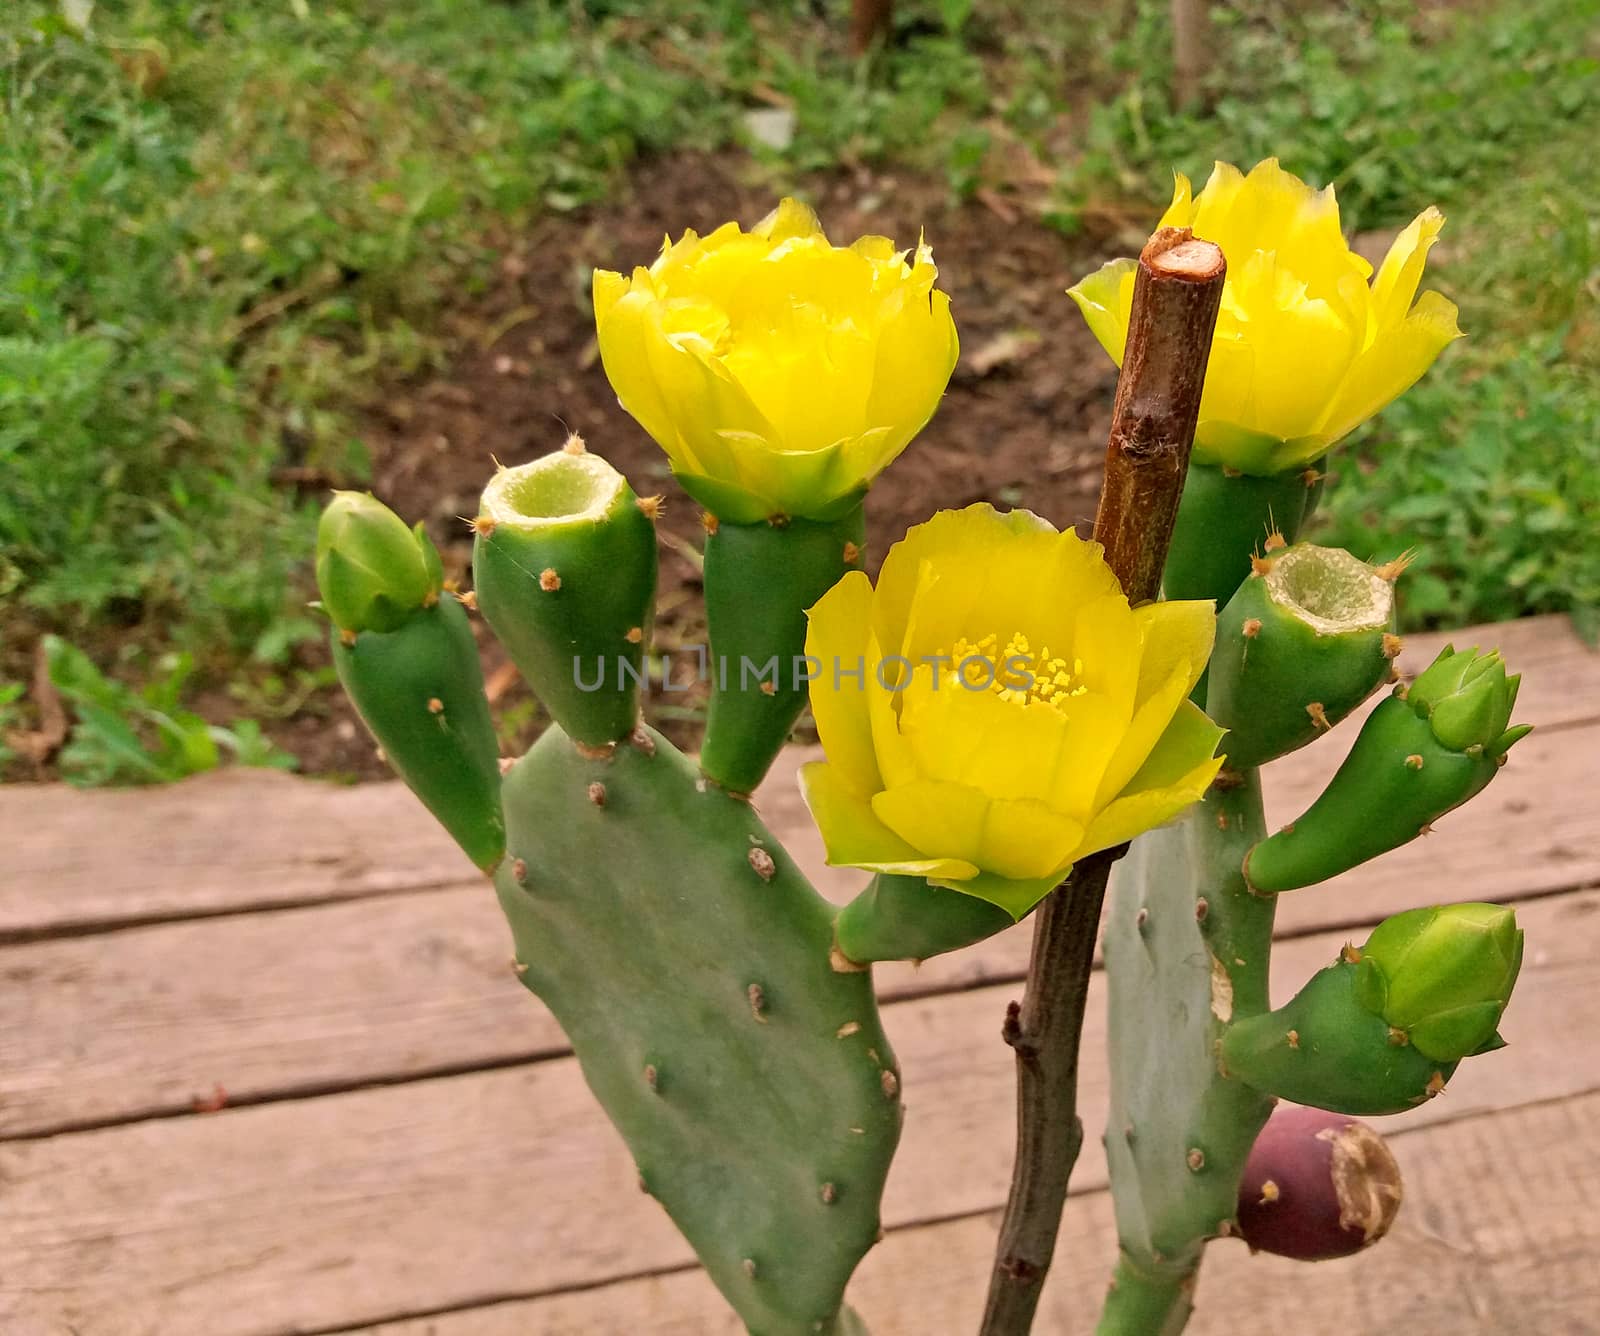 Cactus with fruits blooming in yellow very beautiful by Mindru